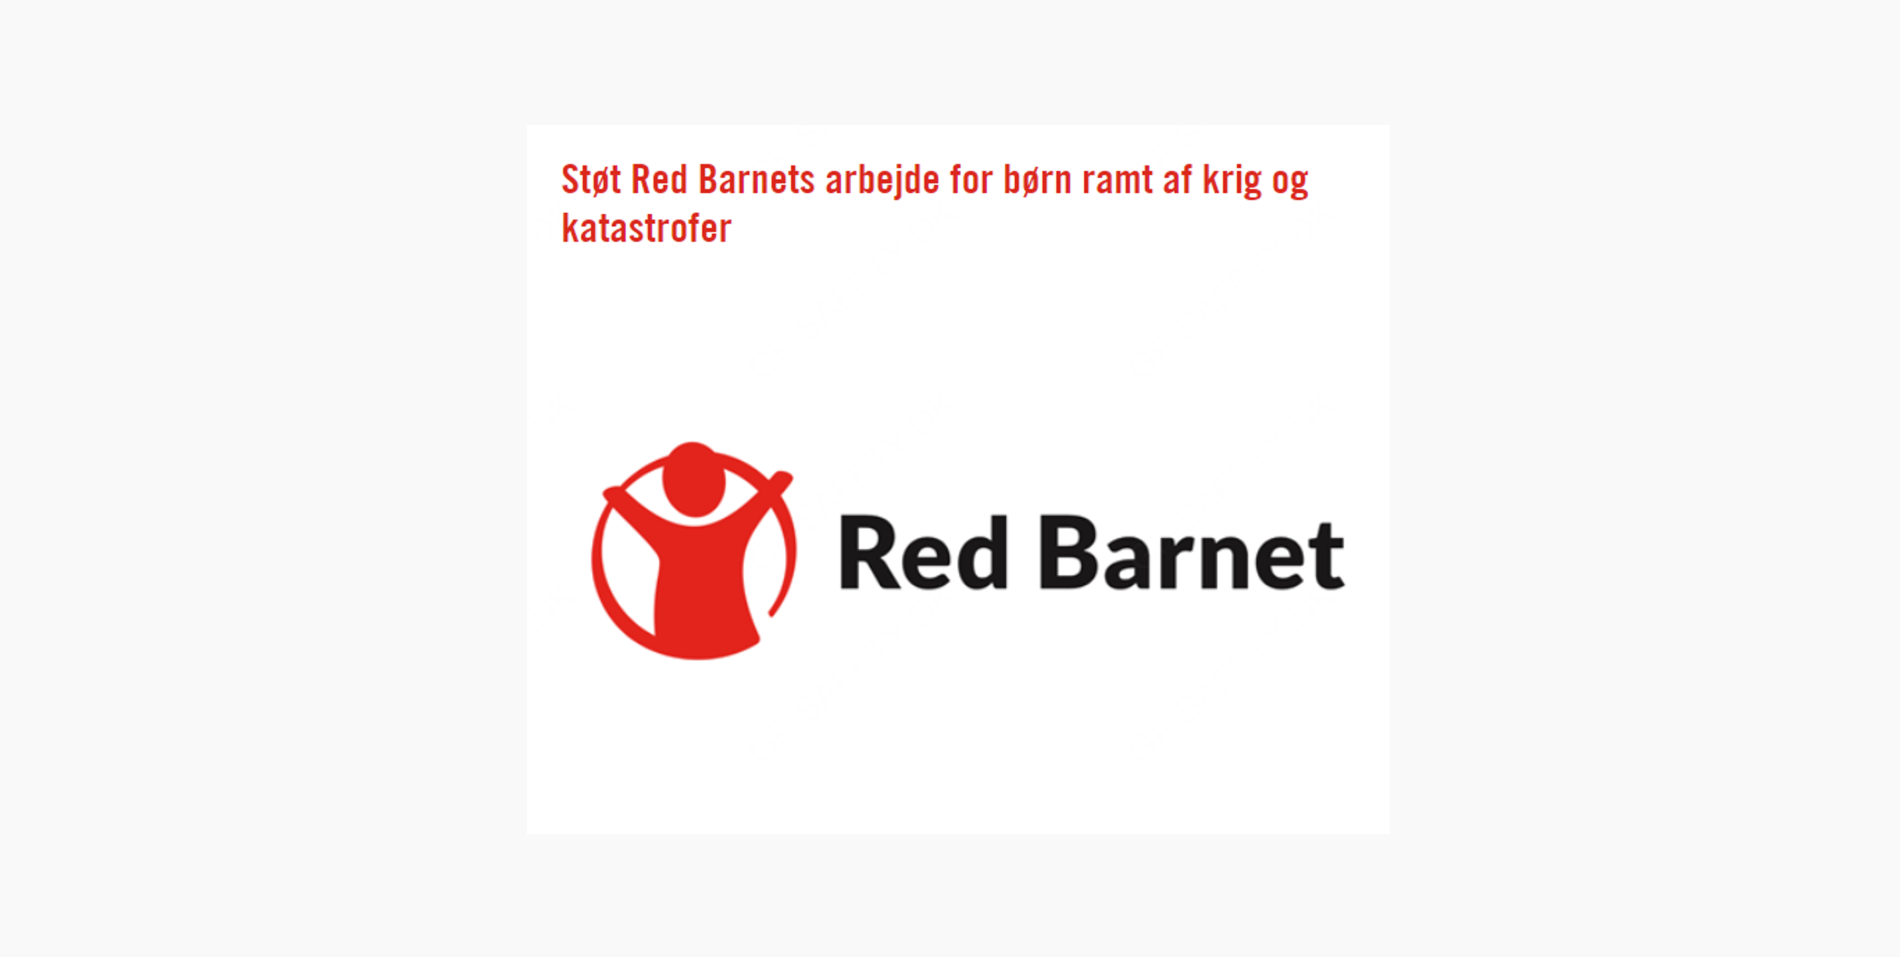 WE SUPPORT RED BARNET